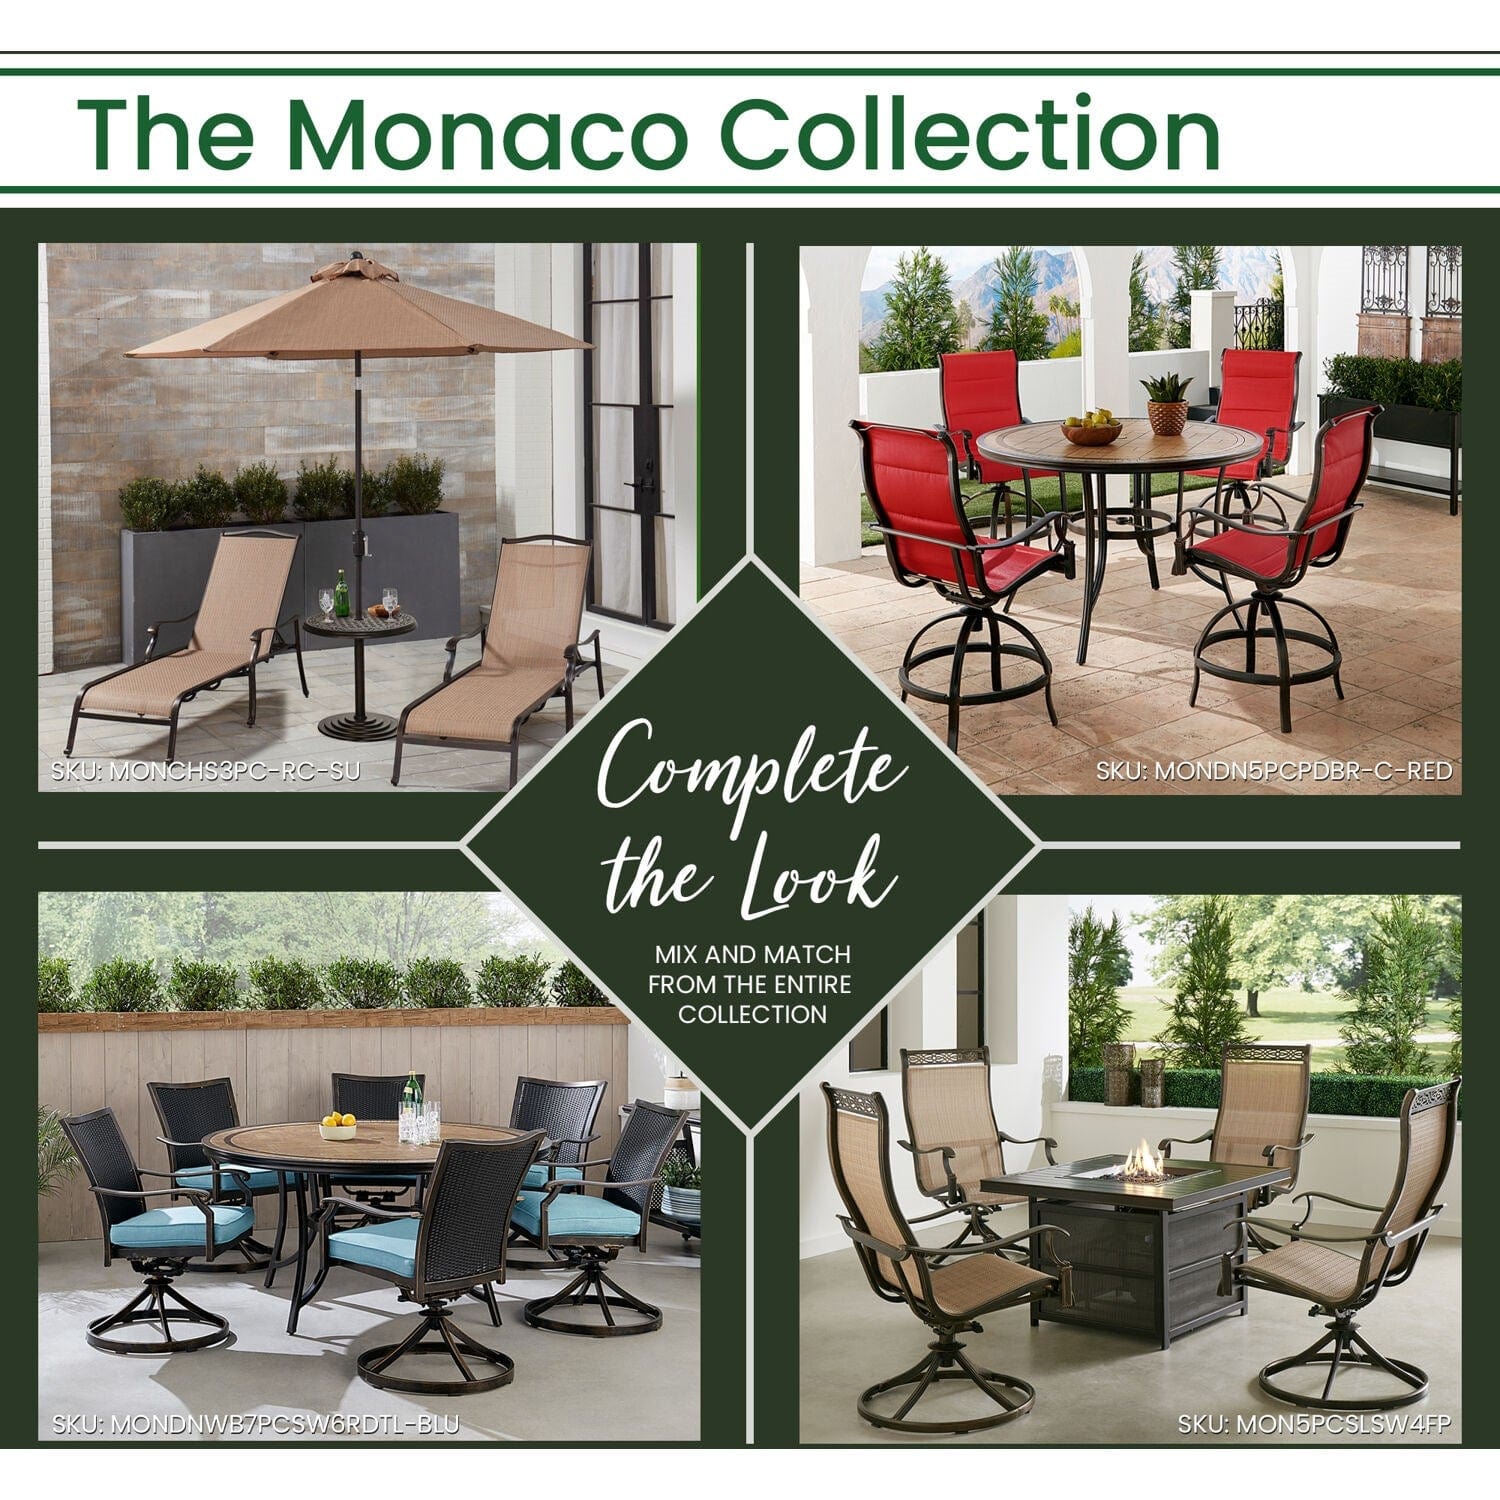 Hanover Outdoor Dining Set Hanover - Monaco 5-Piece Dining Set in Blue with 4 Cushioned Dining Chairs, a 51 In. Tile-Top Table, and a 9 Ft. Table Umbrella | MONDN5PCSW4-SU-B